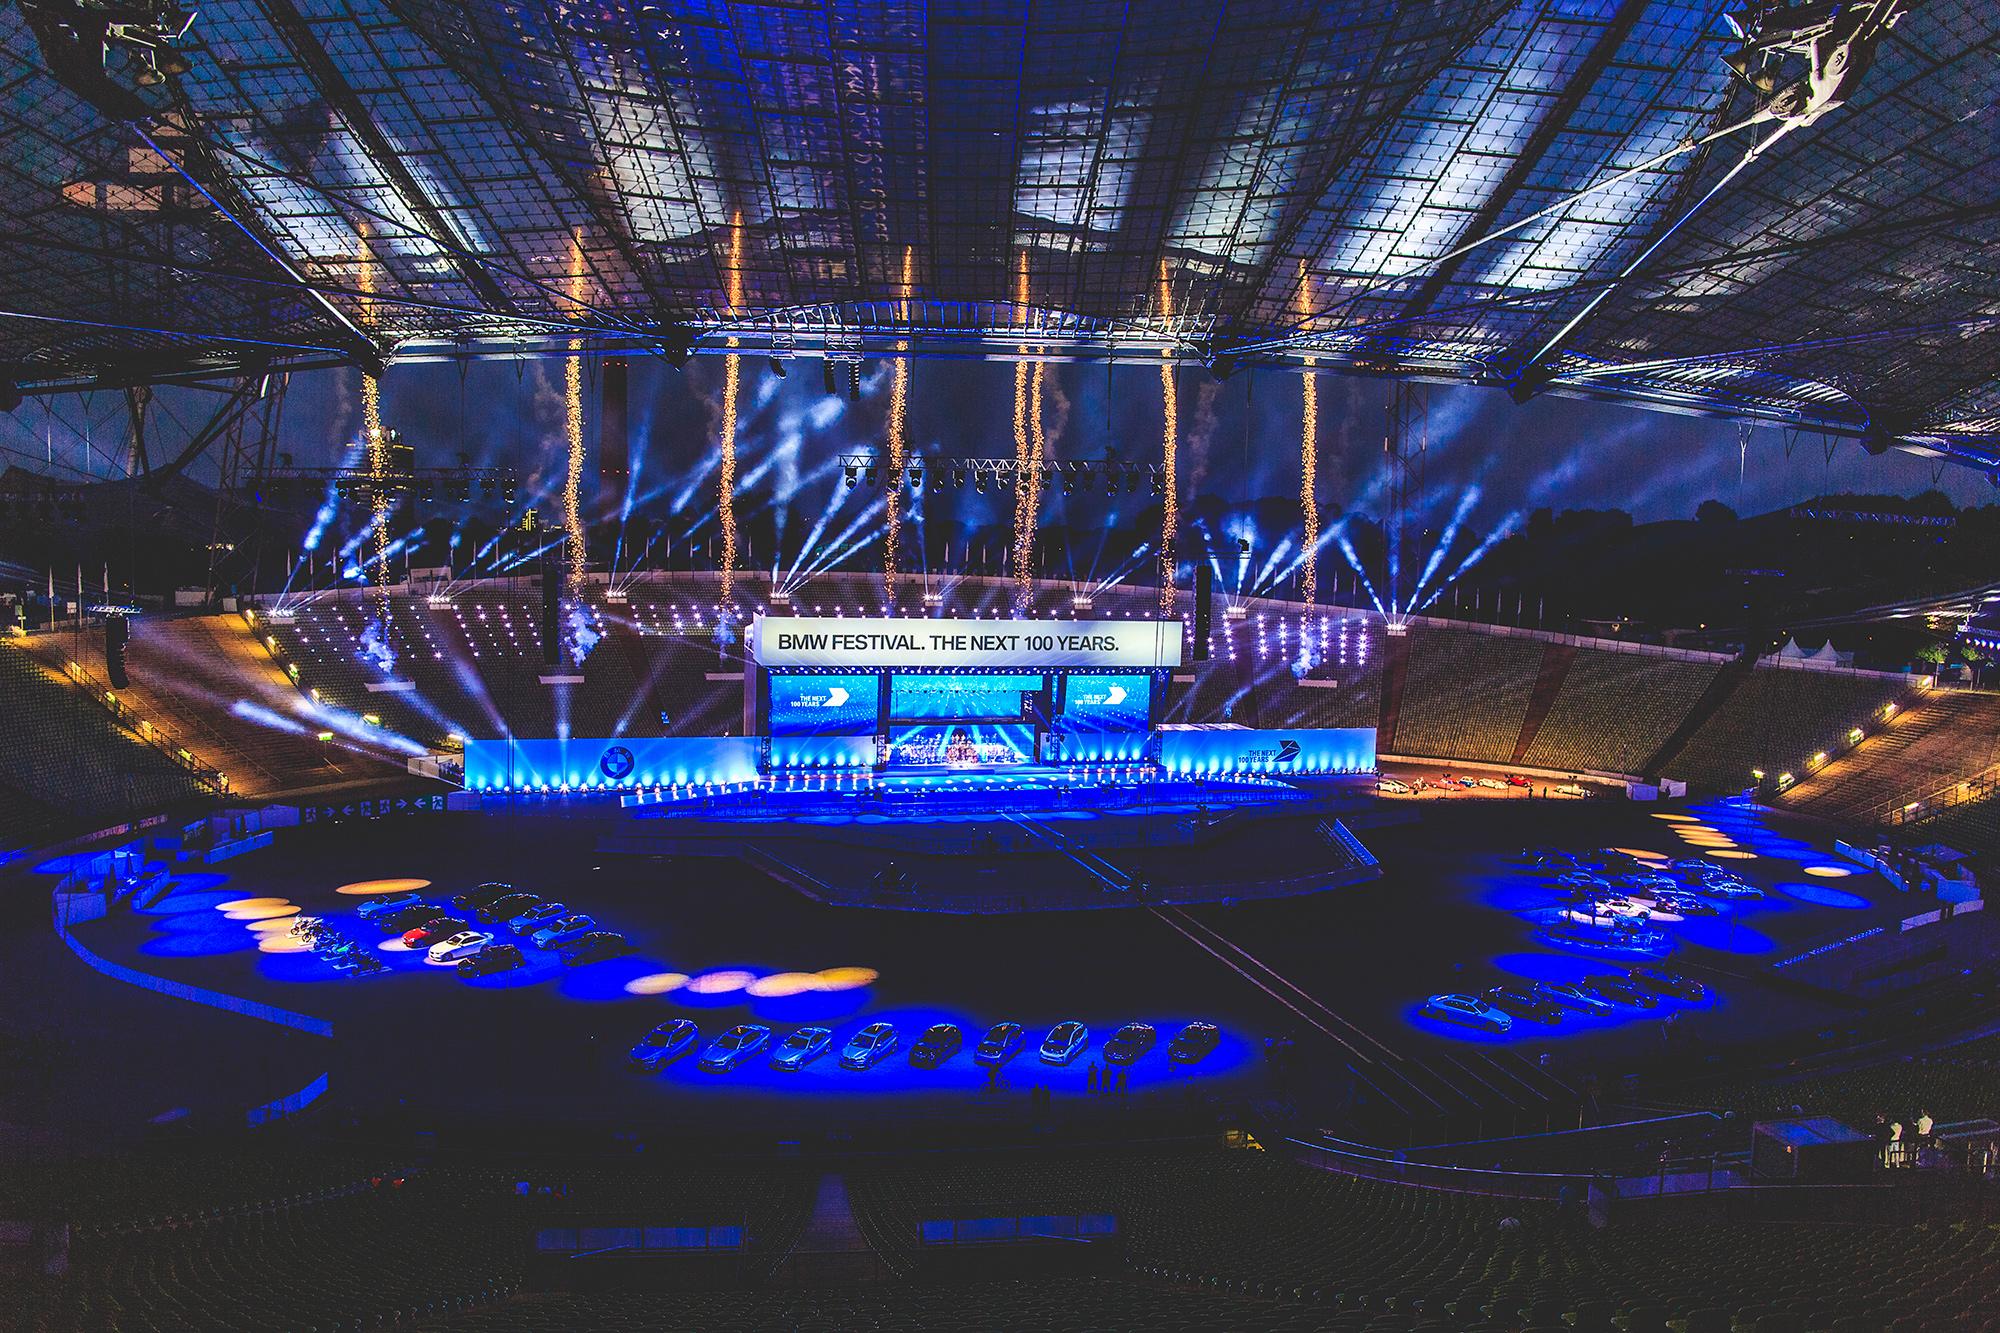 Technical rehearsal at night in a large arena.